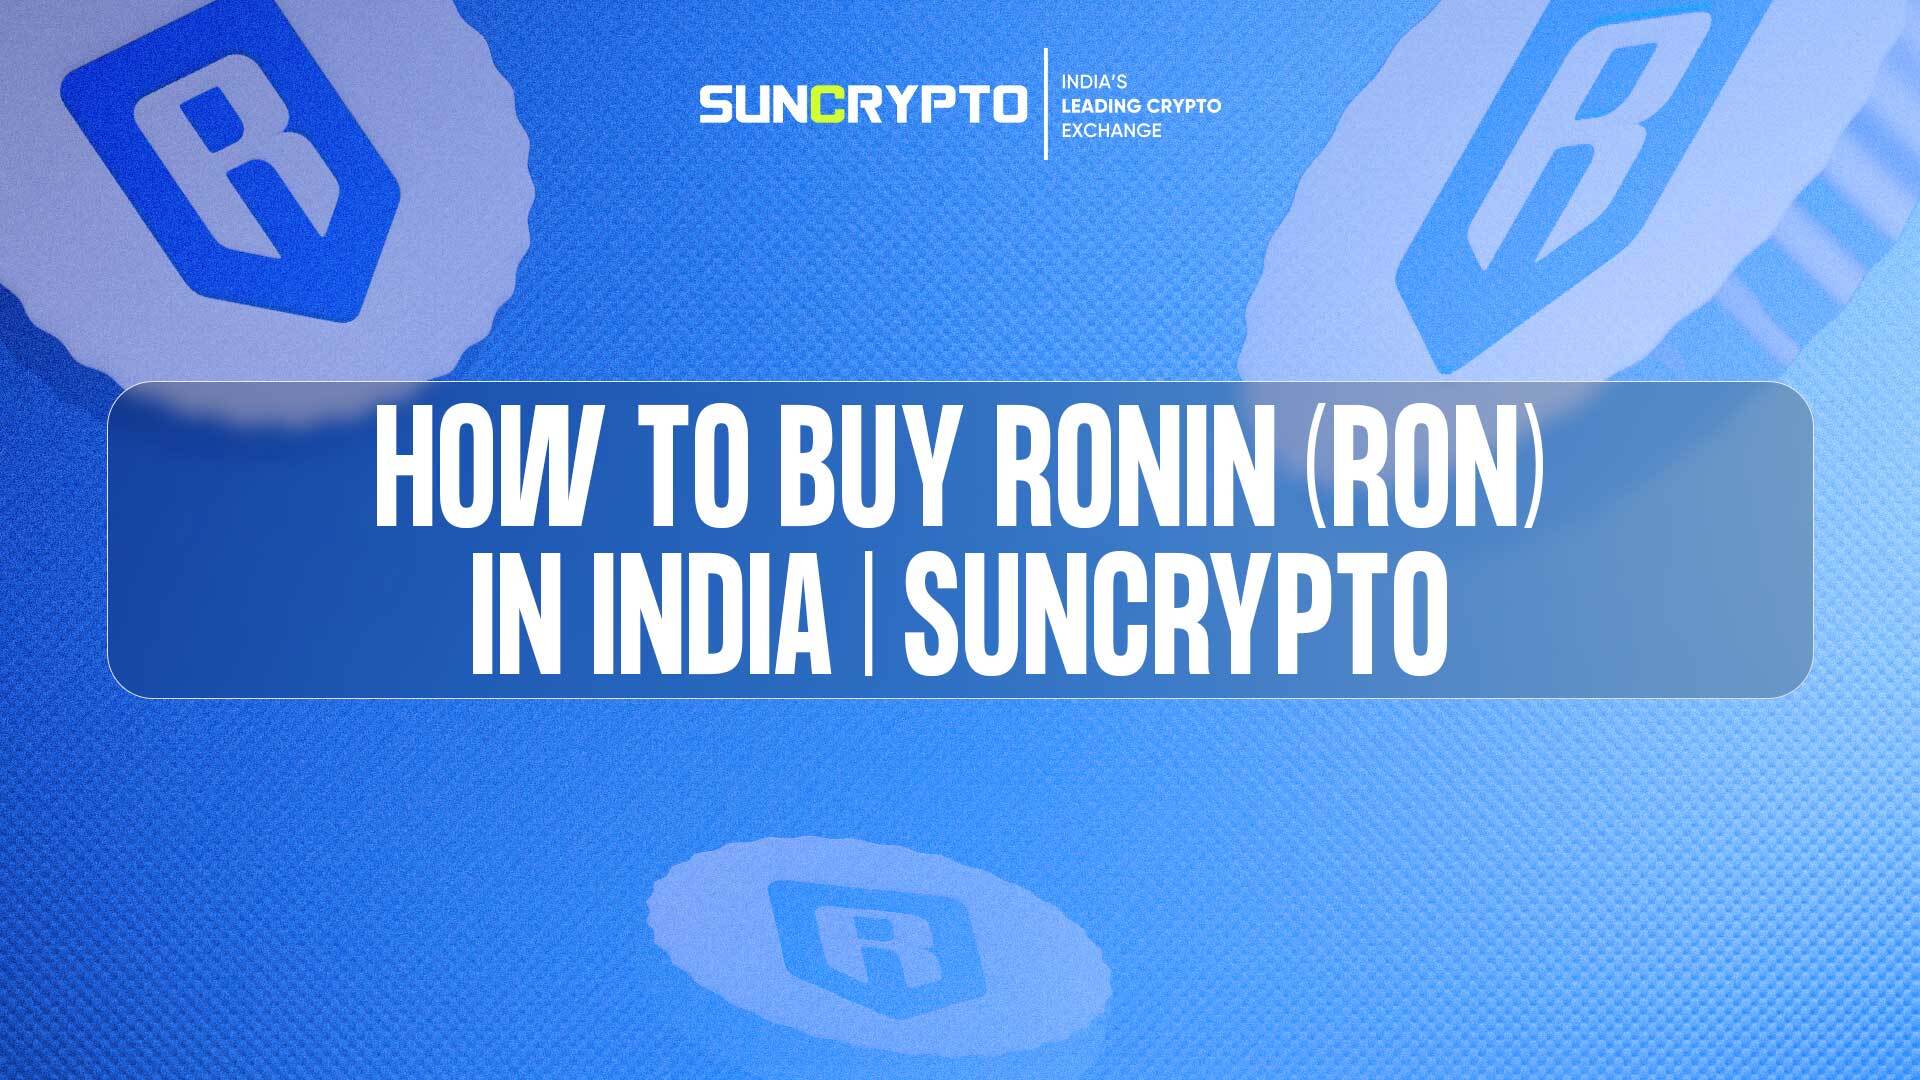 how to buy Ronin (RON) in India